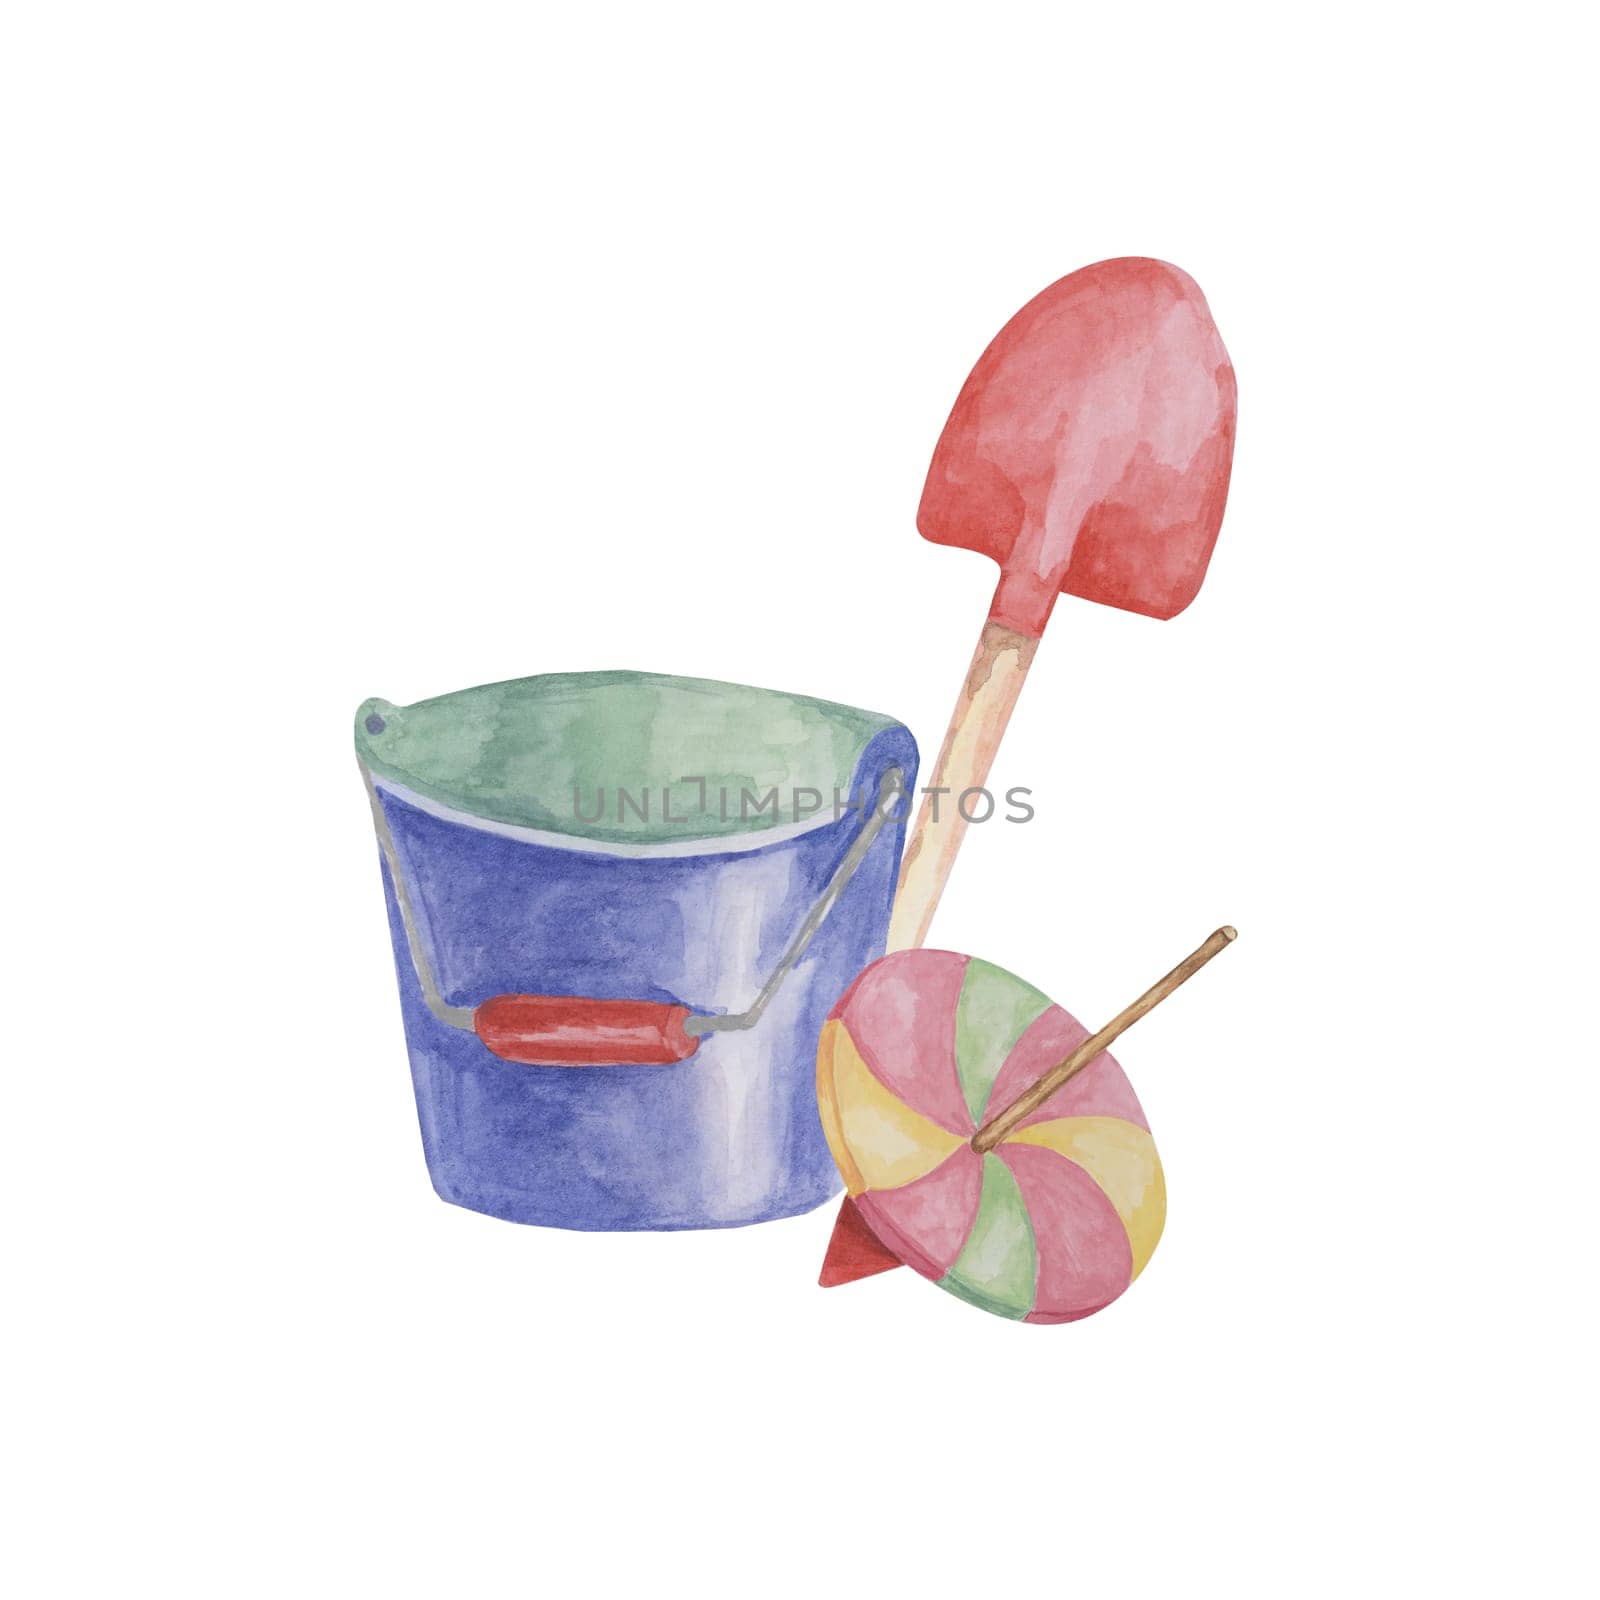 Toy bucket, shovel and whirligig. Beach sand play clipart, retro spinning top and gardening tools game watercolor illustration for kids party, sticker, postcard, invitation, baby shower, nursery decor